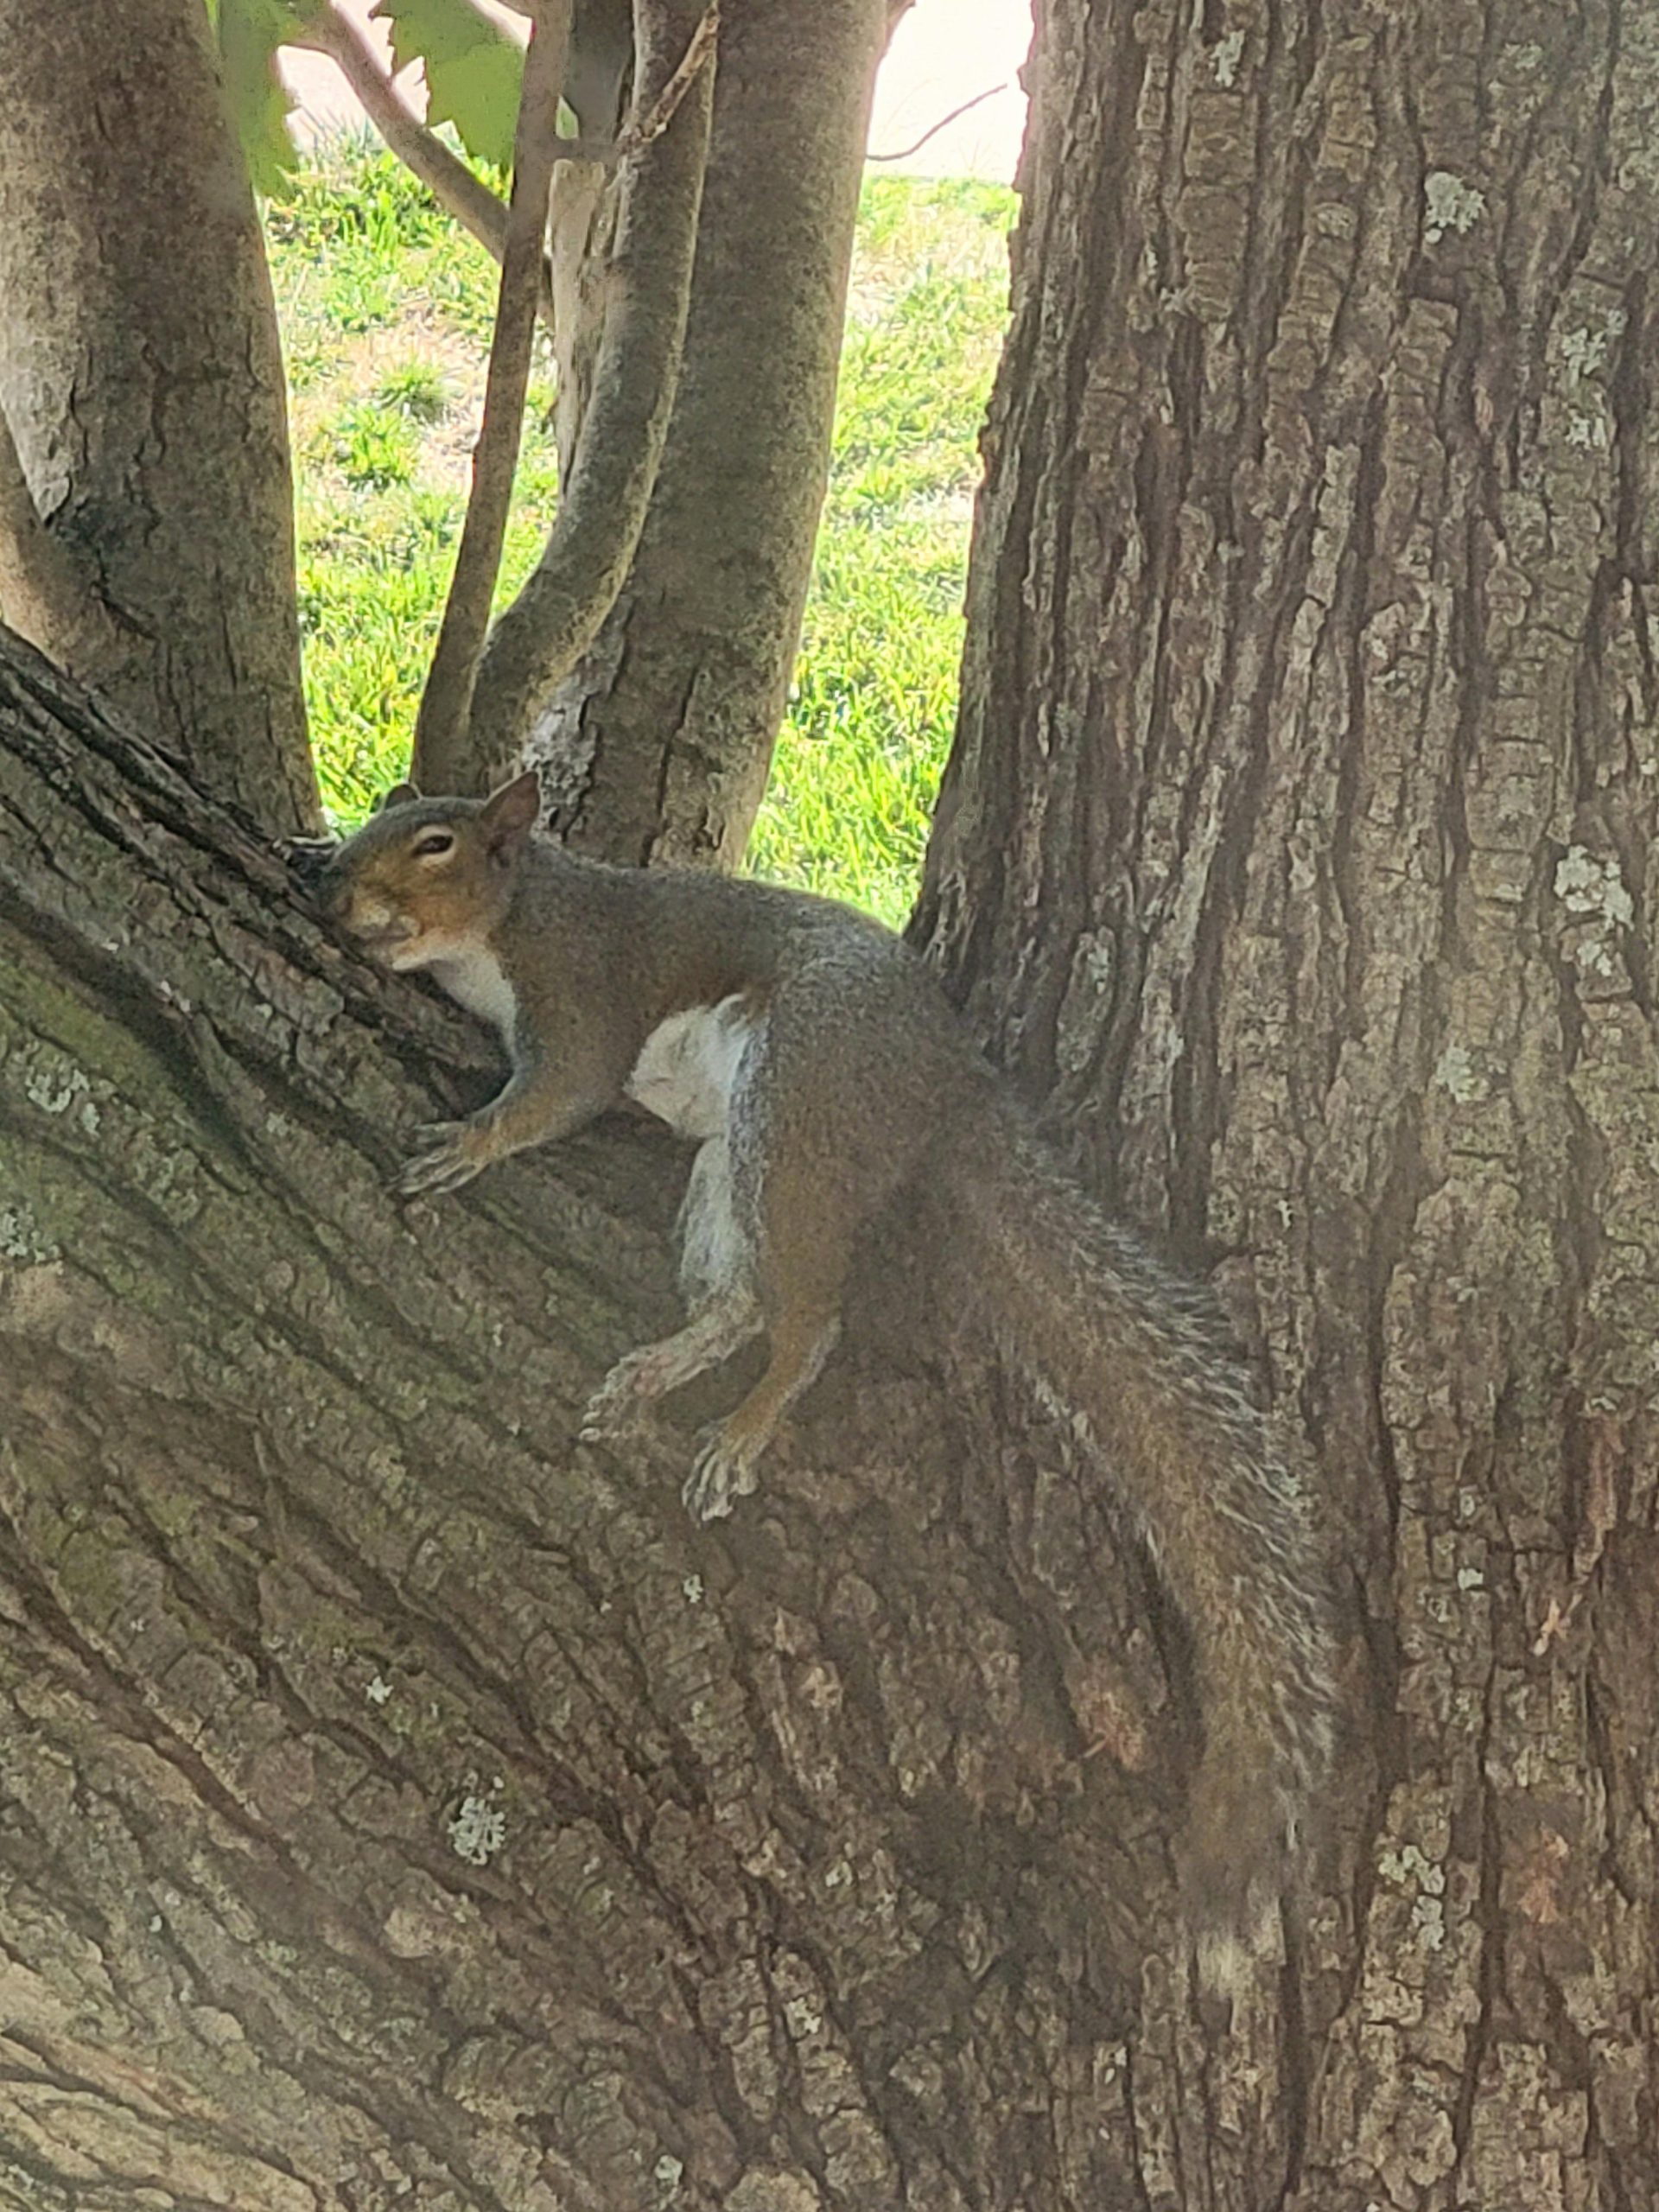 Squirrel in a tree on a sizzling summer day in KC